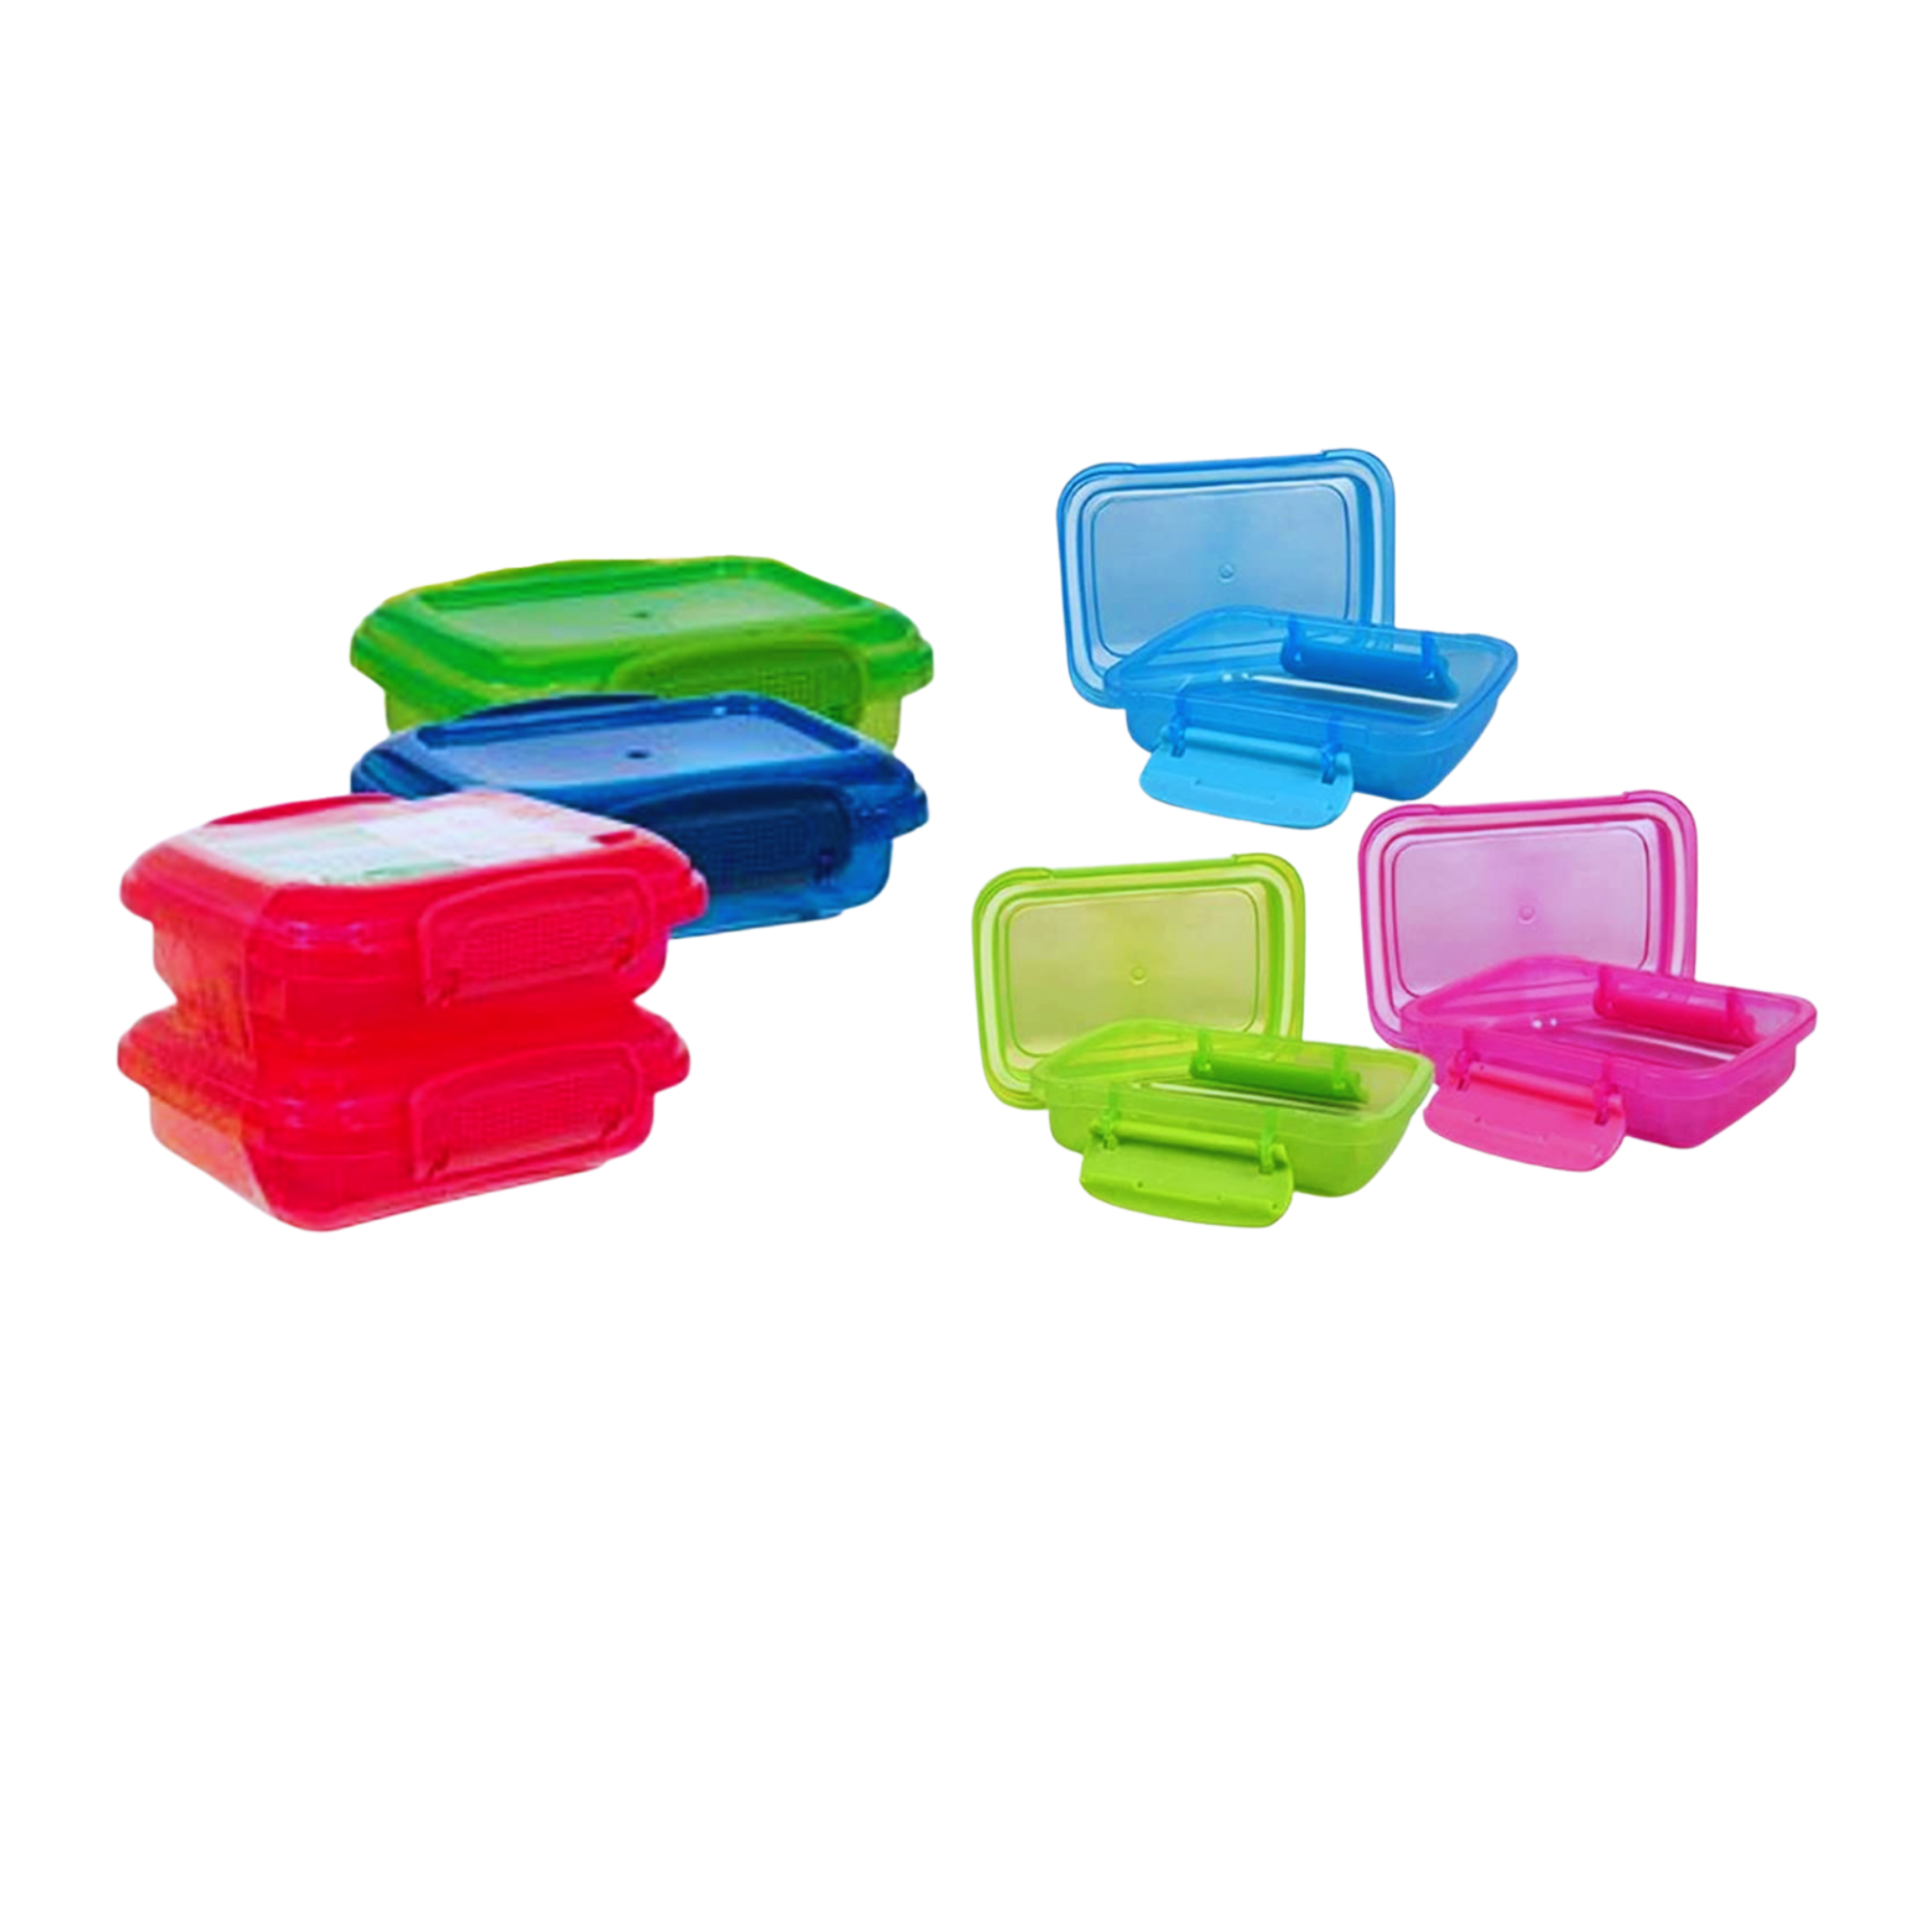 Plastic Rectangular Snack Containers with Lock-Top Lids, Mini Food Storage  Plastic Reusable Container for Pantry & Kitchen Organization Snack, Lunch,  Picnics Camping Bento Box Set of 12 Colors Vary 